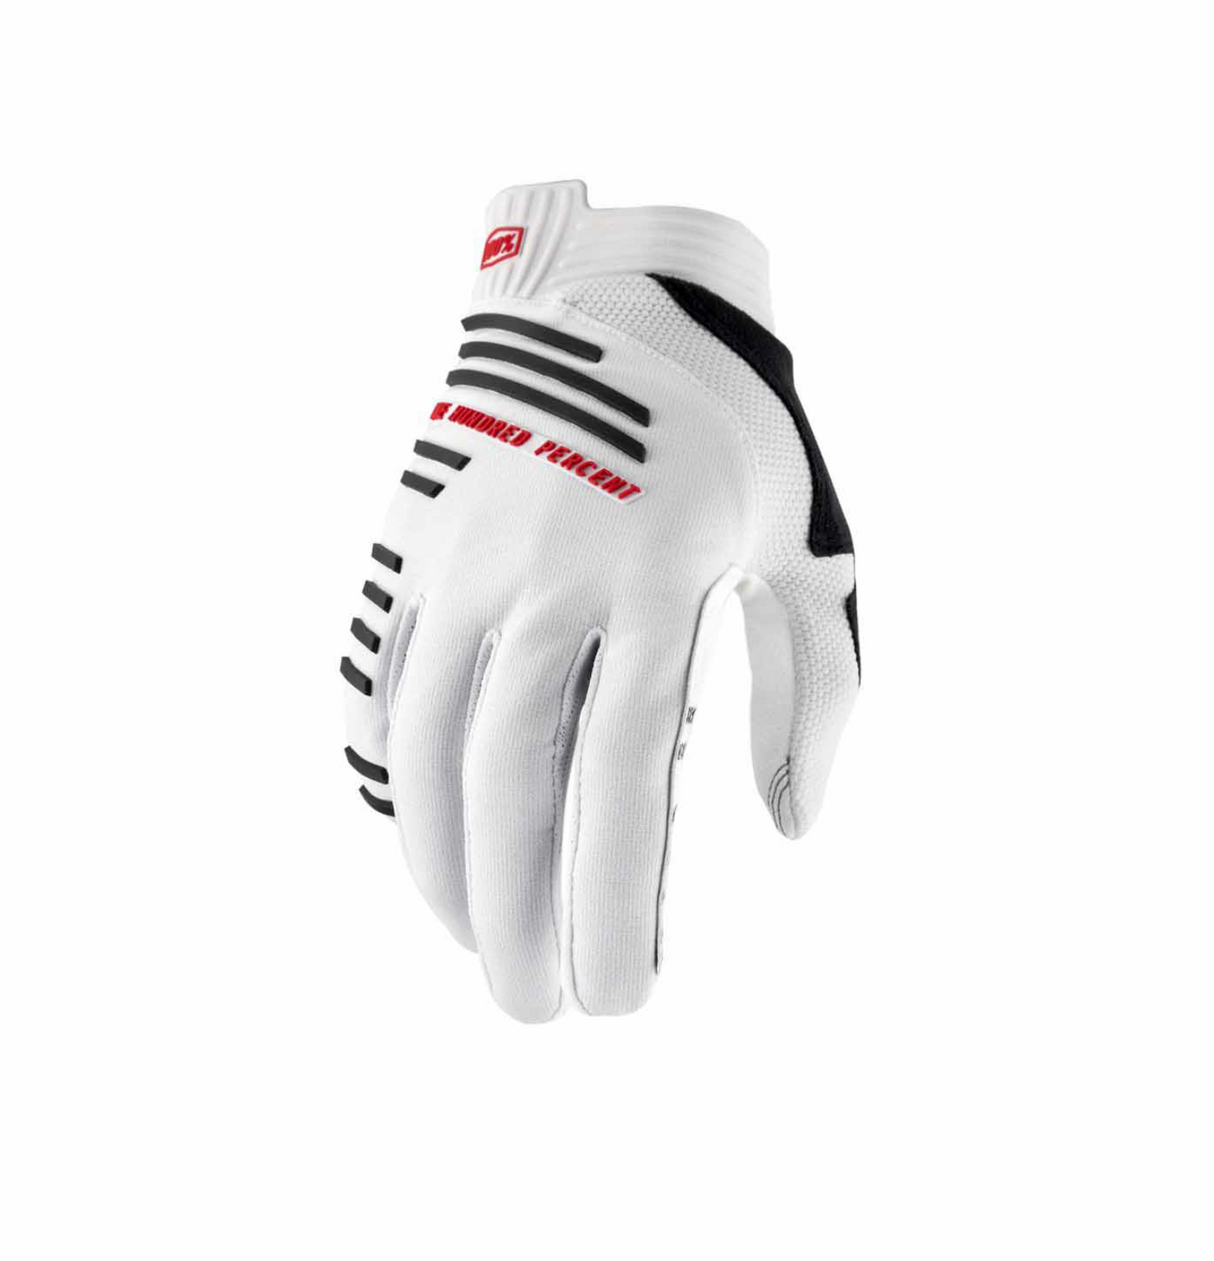 100% DH/All Mountain Full Finger Cycling Gloves R-CORE Glove Silver - Medium Sporting Goods > Cycling > Cycling Clothing > Gloves Full Catalog 100%